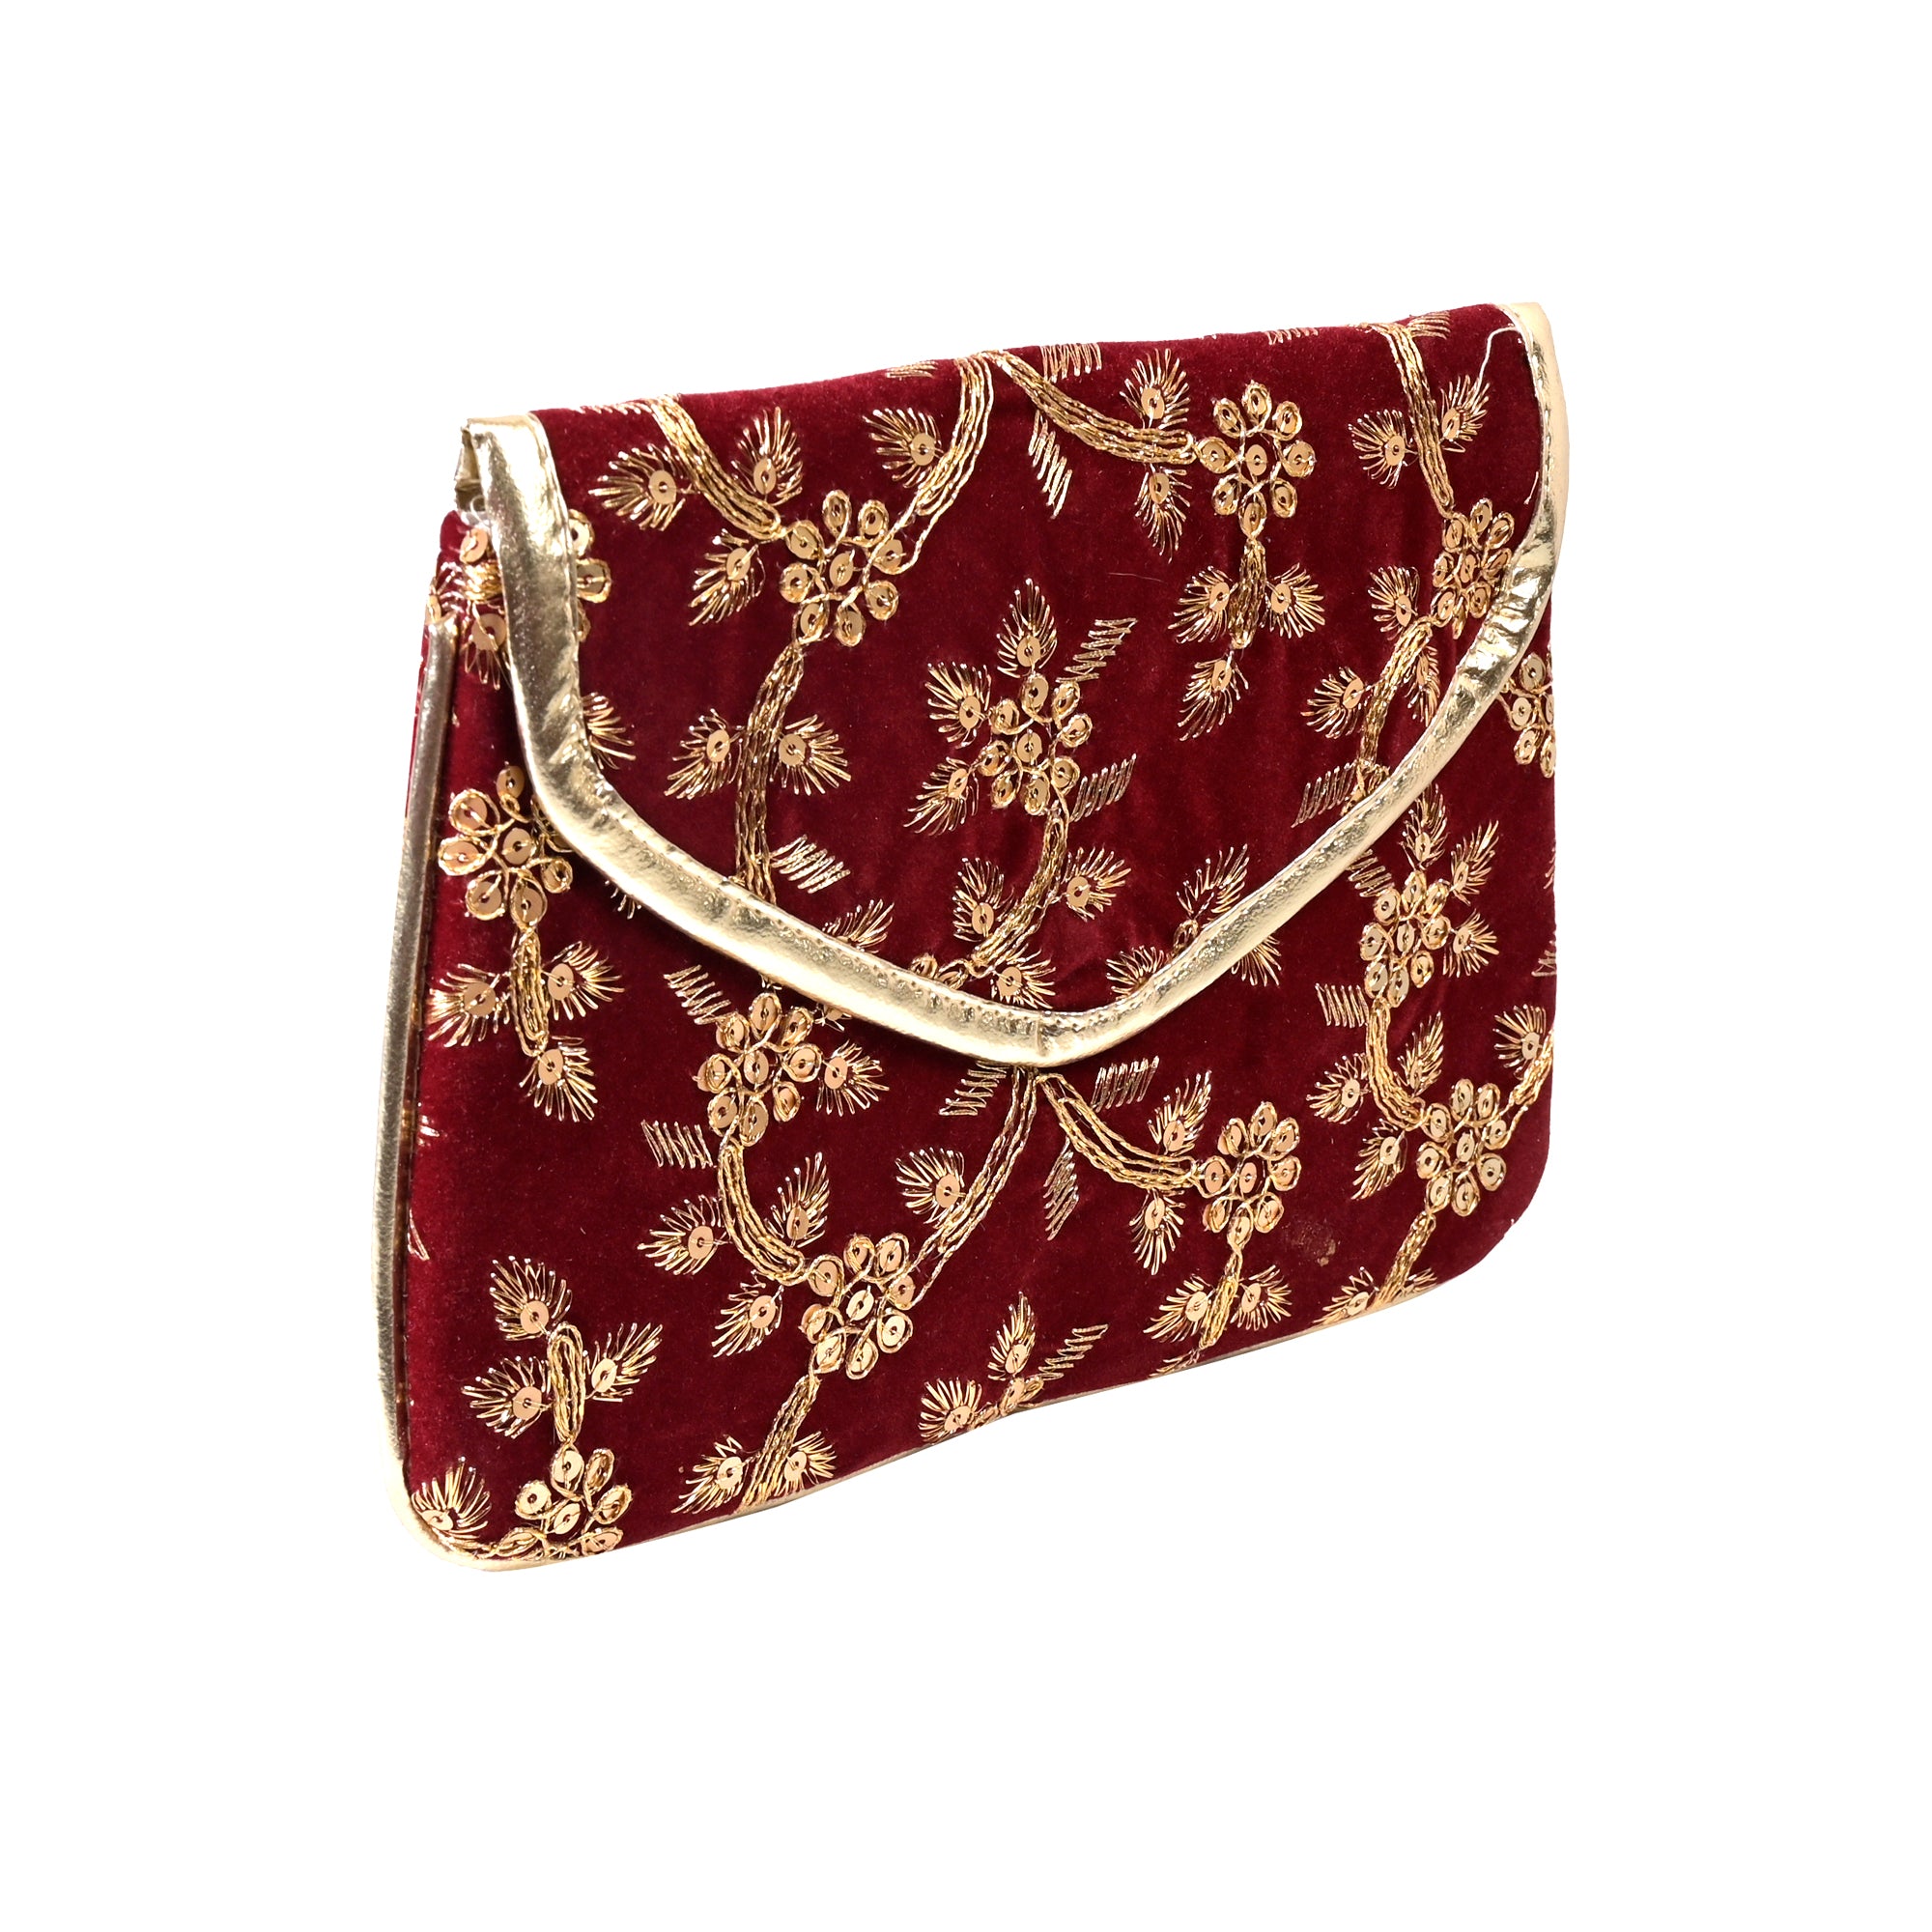 The Happy Handbag Red Clutch Pearl Purses for Women Handbag Bridal Evening  Clutch Bags for Party